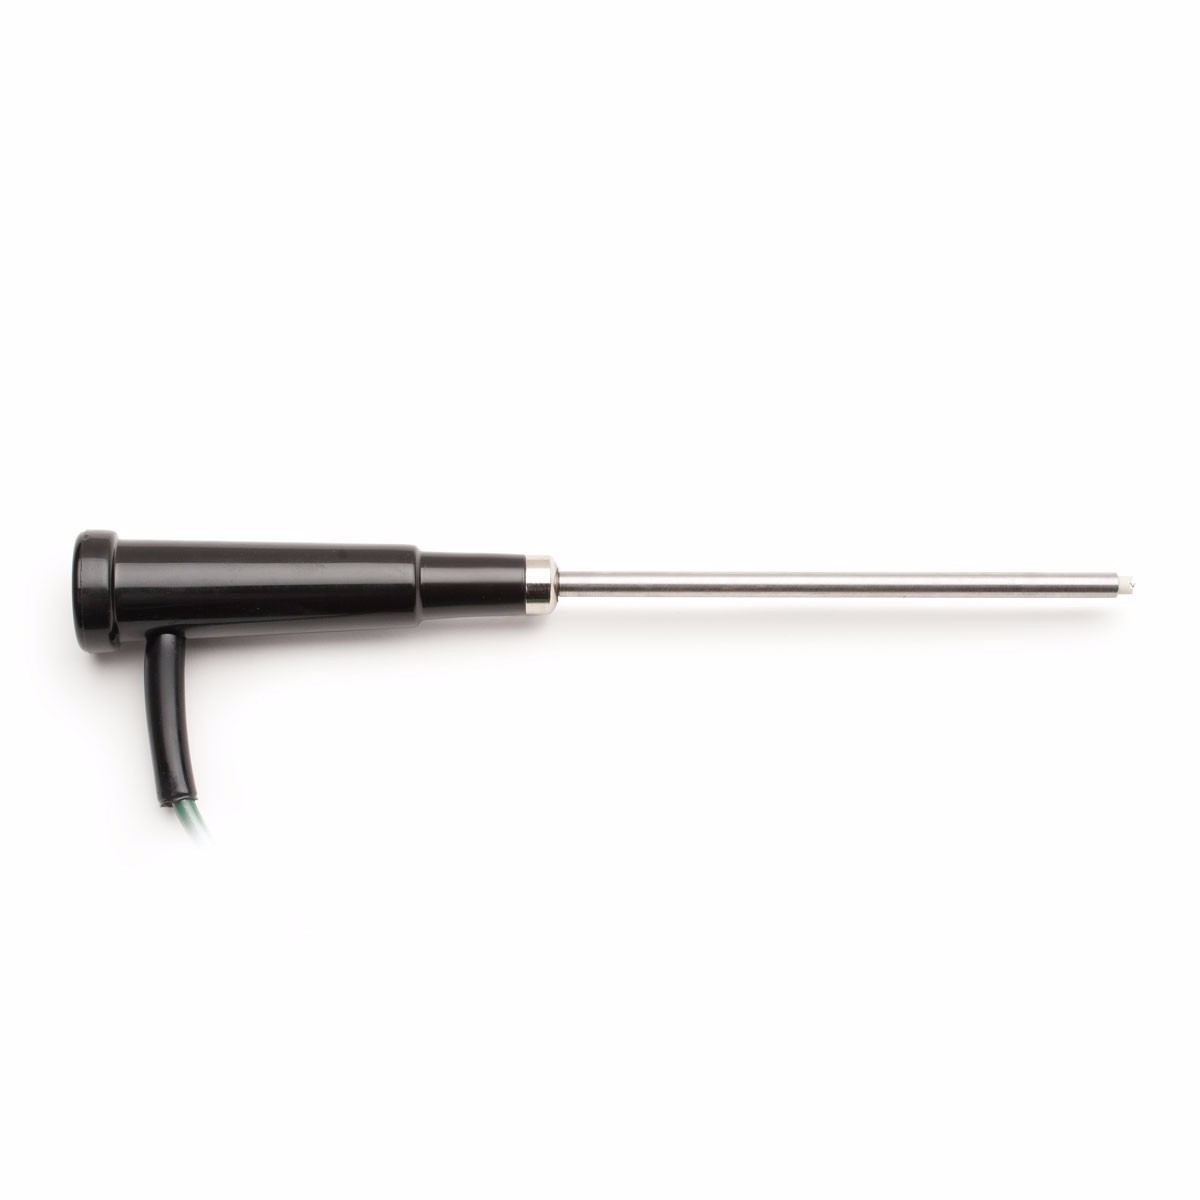 HI766B3 Small Surface K-Type Thermocouple Probe with Handle